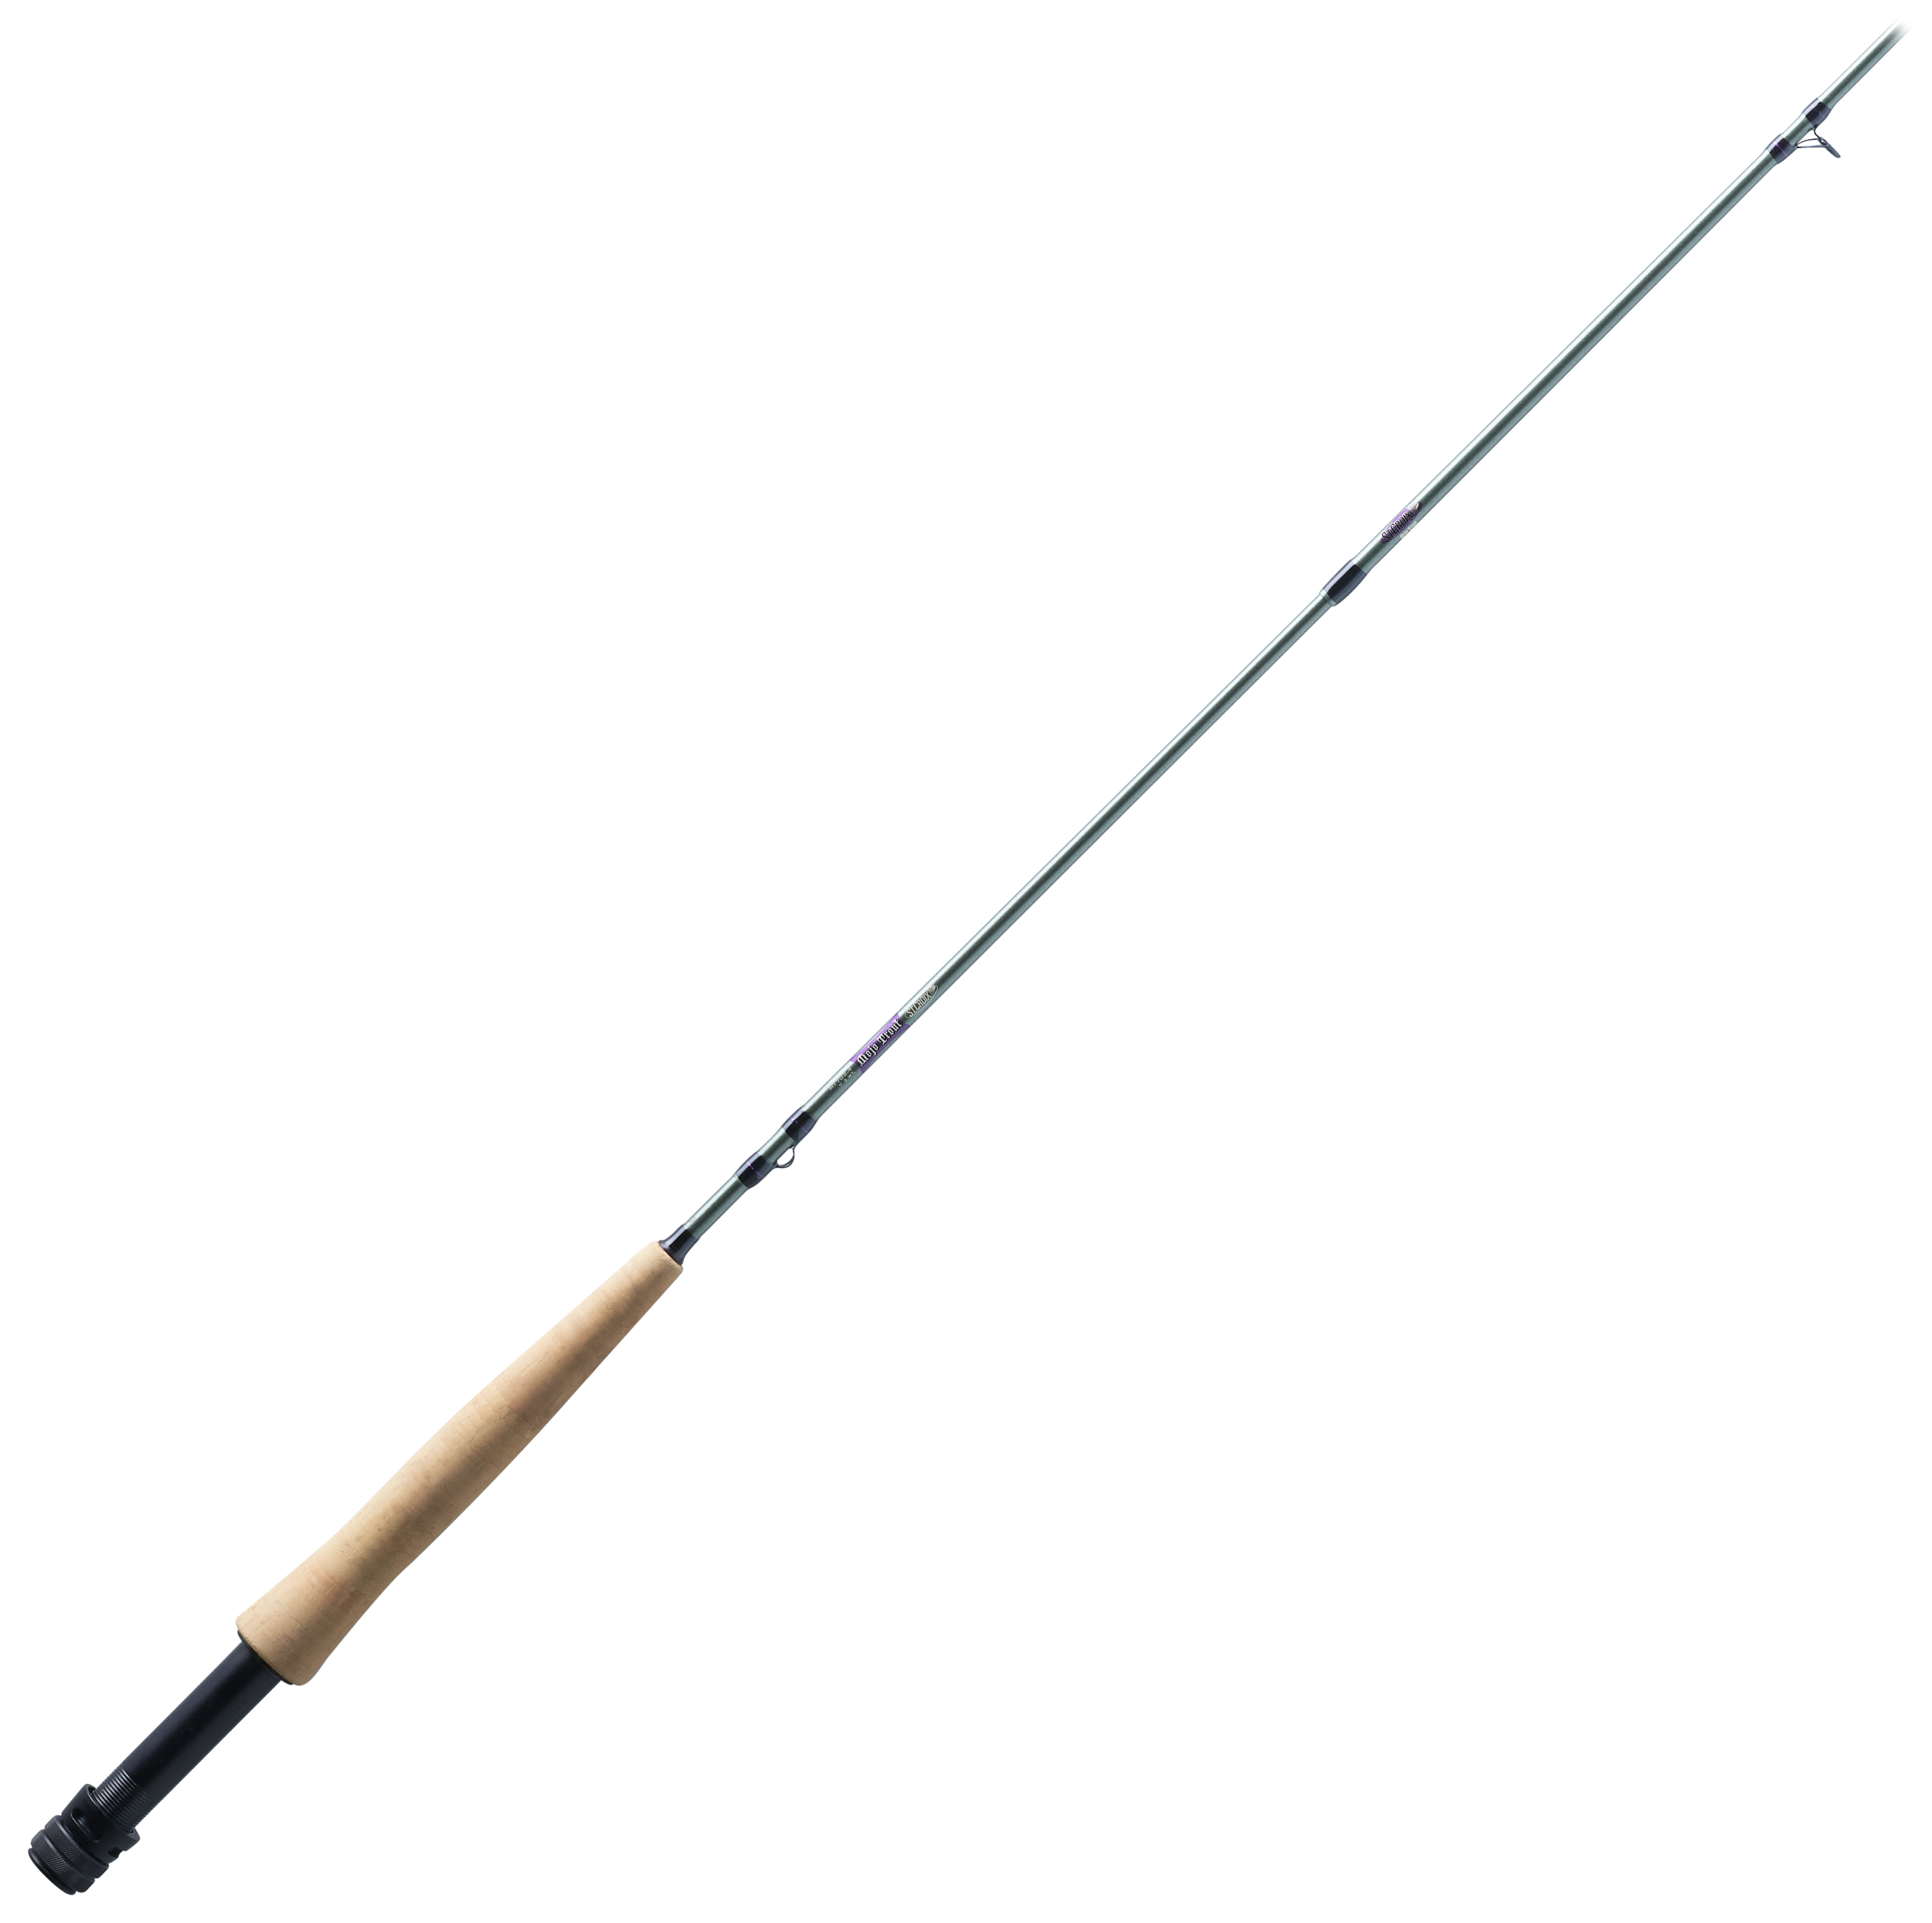 St. Croix Mojo Trout Fly Rod - MT904.4